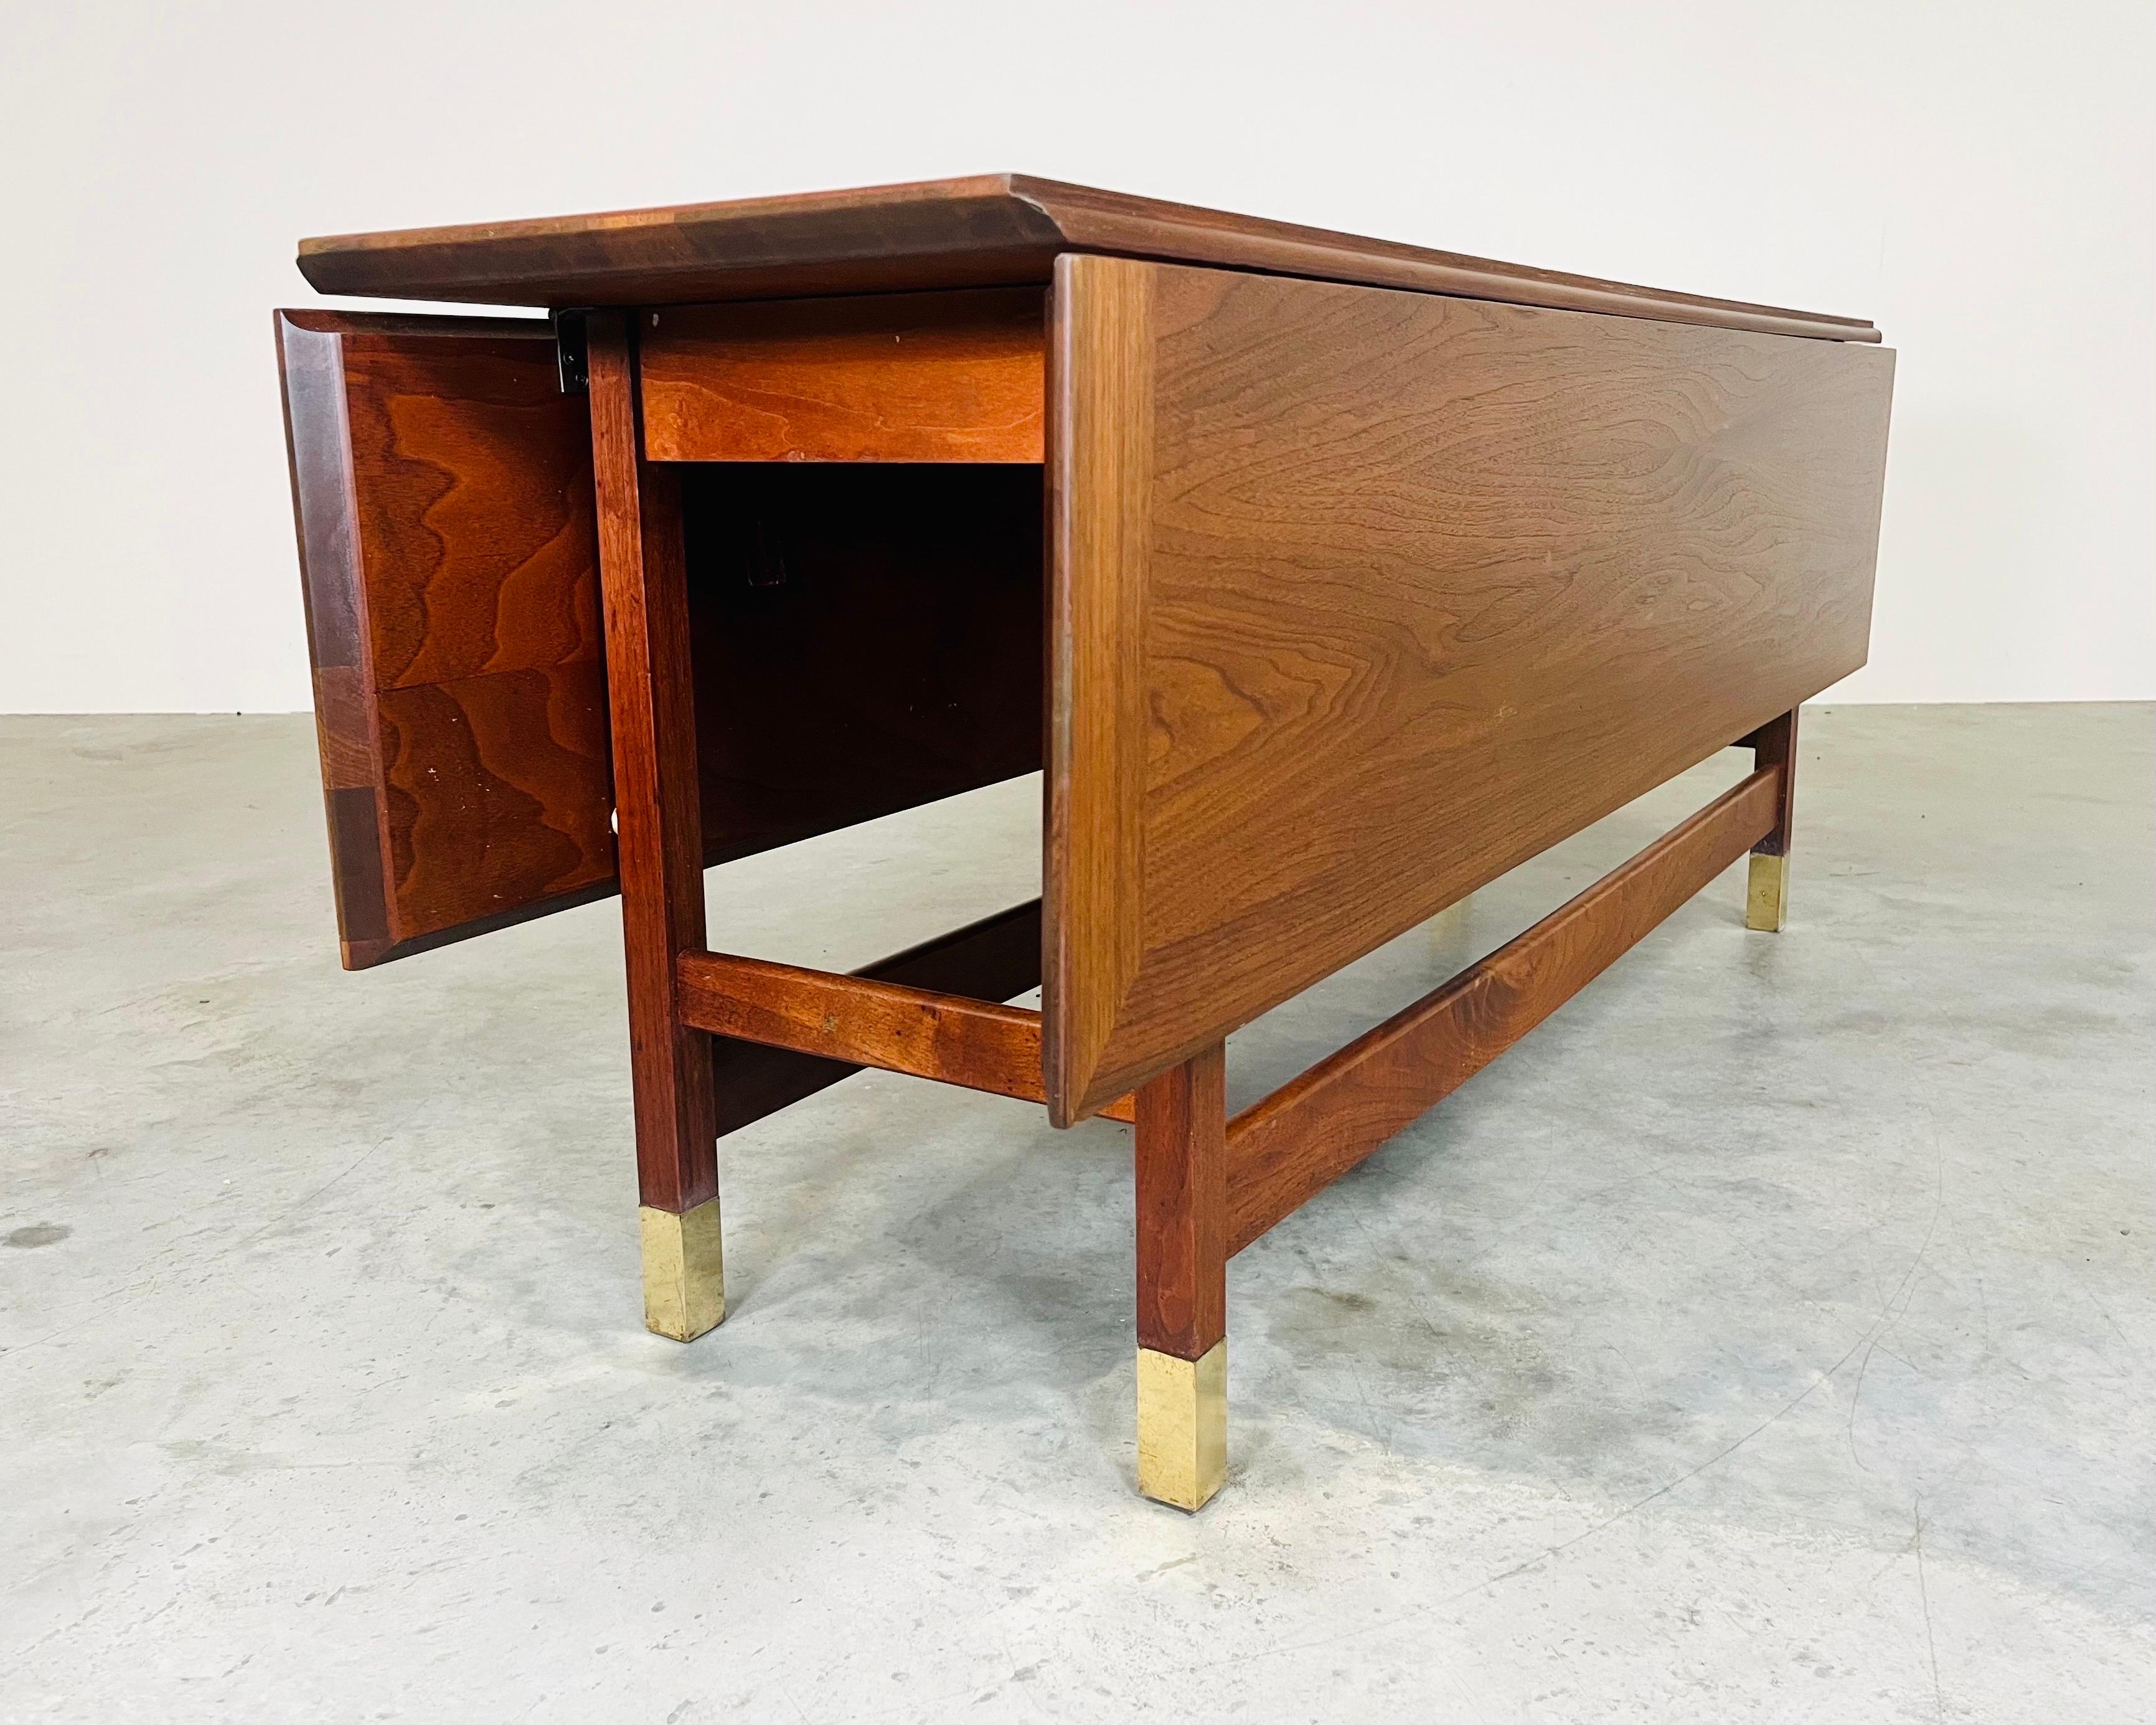 Mid-Century FOUNDERS Coronado Drop-leaf Console Occasional or Serving Table After Harvey Probber 
Having banded walnut top and walnut frame with brass sabot feet. A versatile table that will serve in a private setting or as the center server during